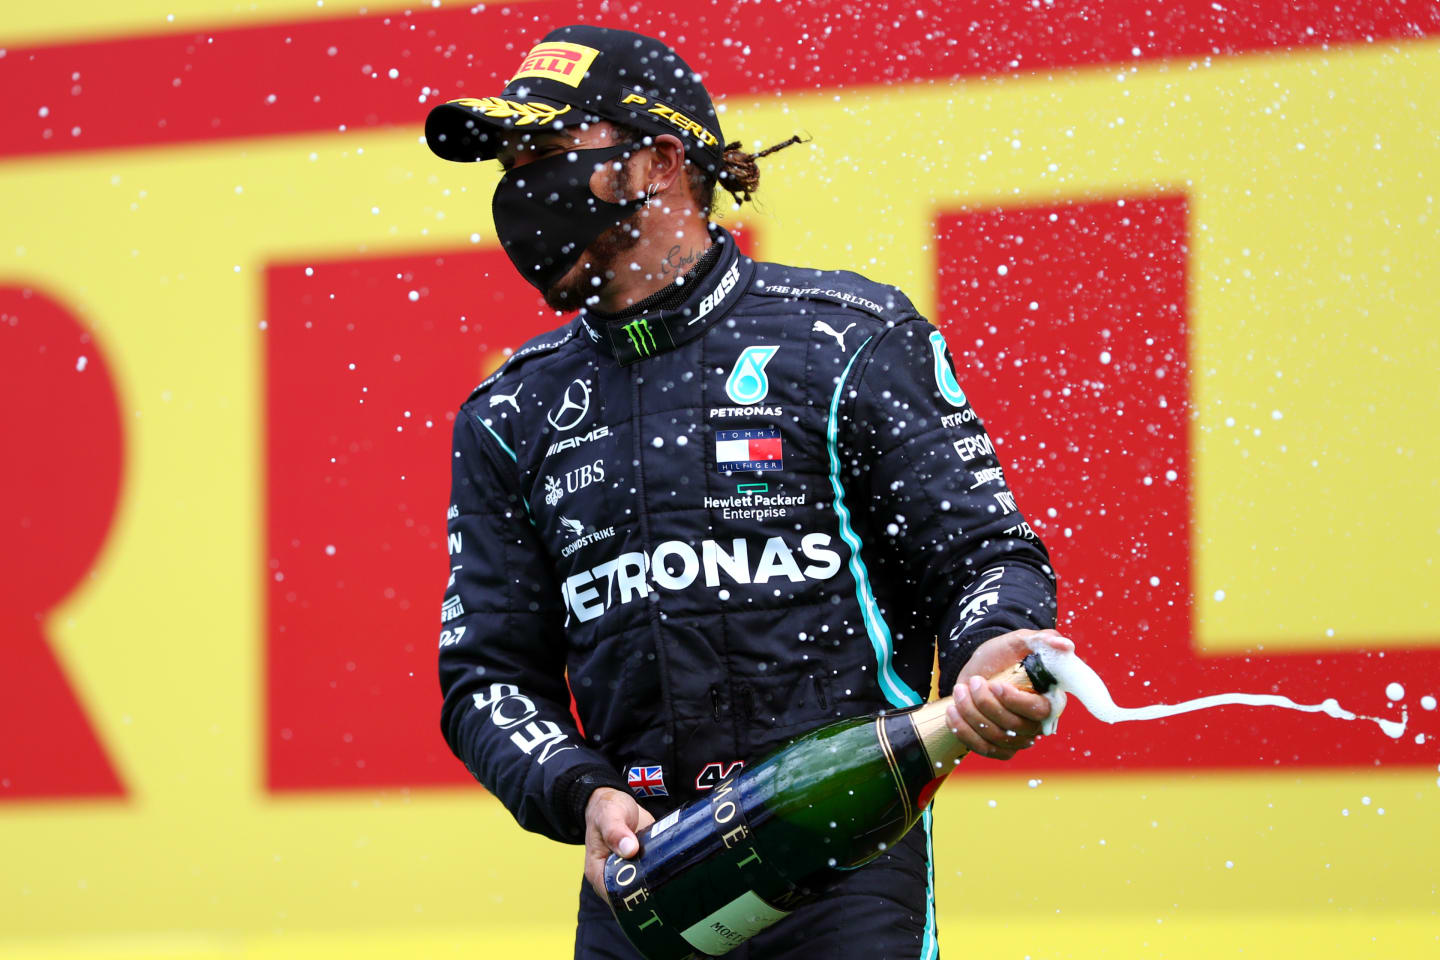 SPIELBERG, AUSTRIA - JULY 12: Lewis Hamilton of Great Britain and Mercedes GP celebrates on the podium after winning the Formula One Grand Prix of Styria at Red Bull Ring on July 12, 2020 in Spielberg, Austria. (Photo by Dan Istitene - Formula 1/Formula 1 via Getty Images)